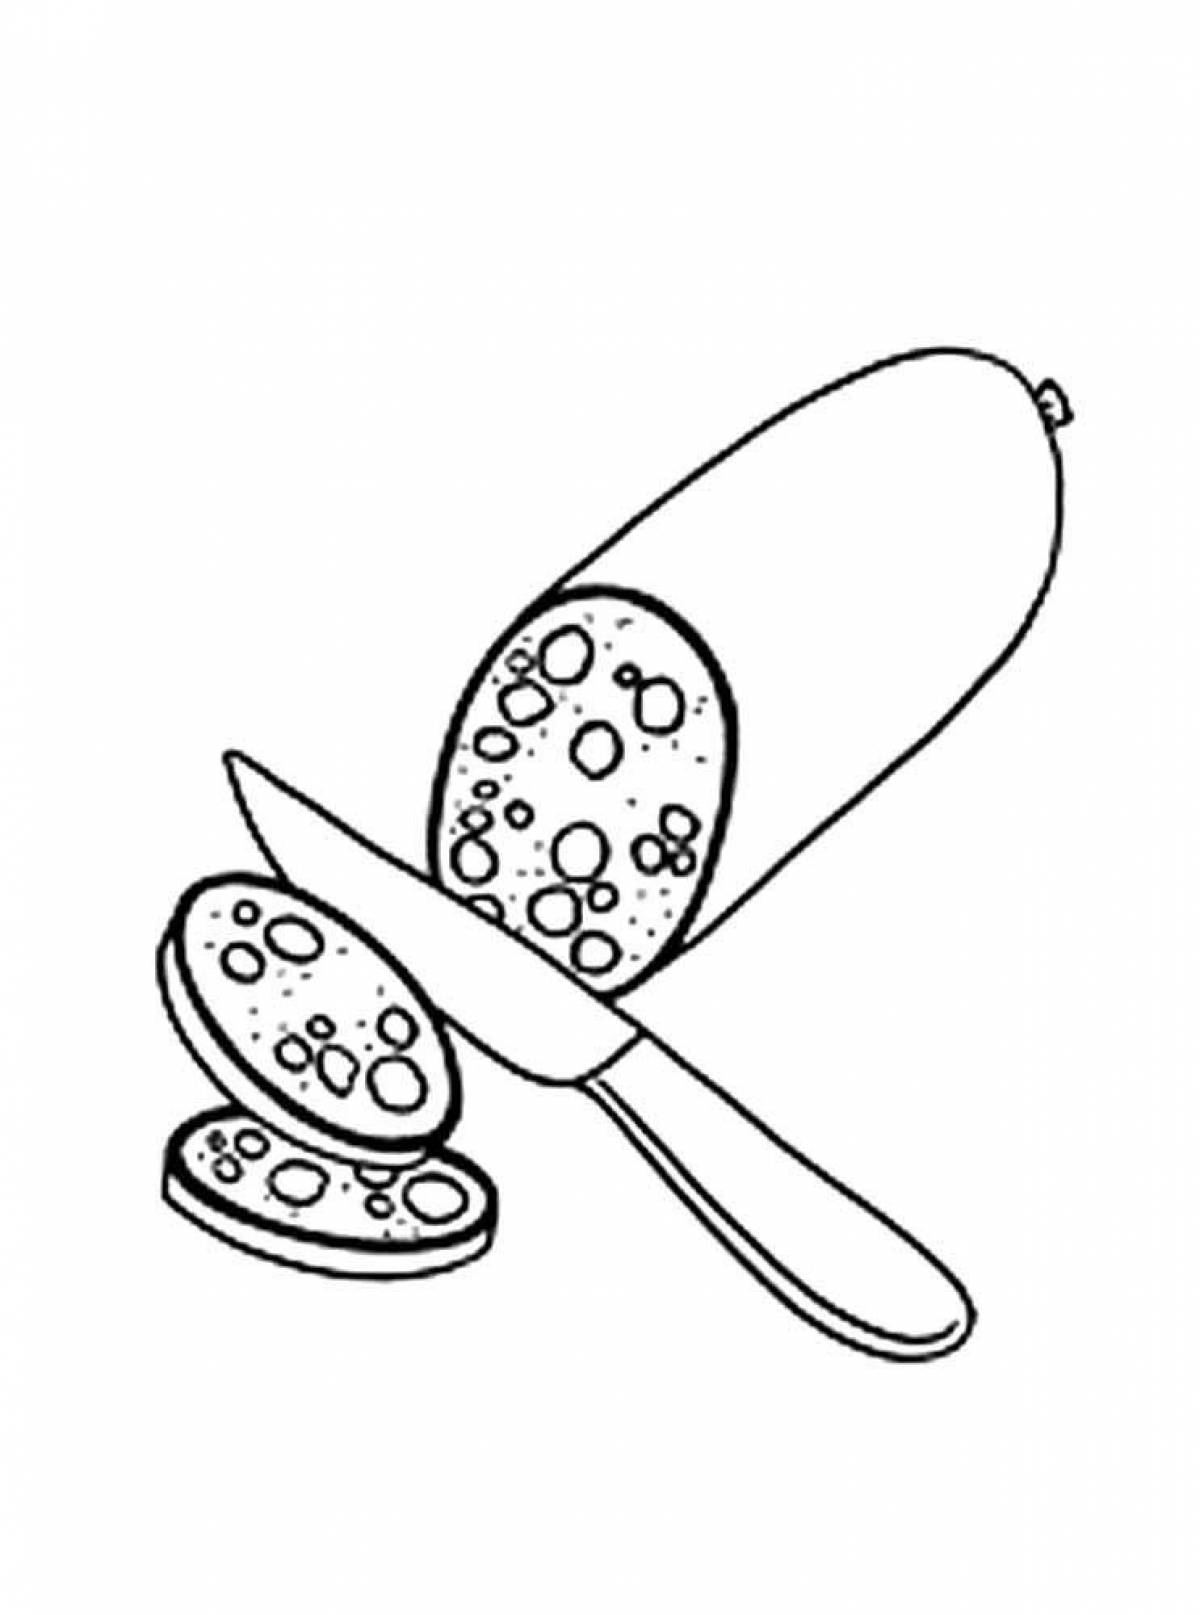 Amazing sausage coloring page